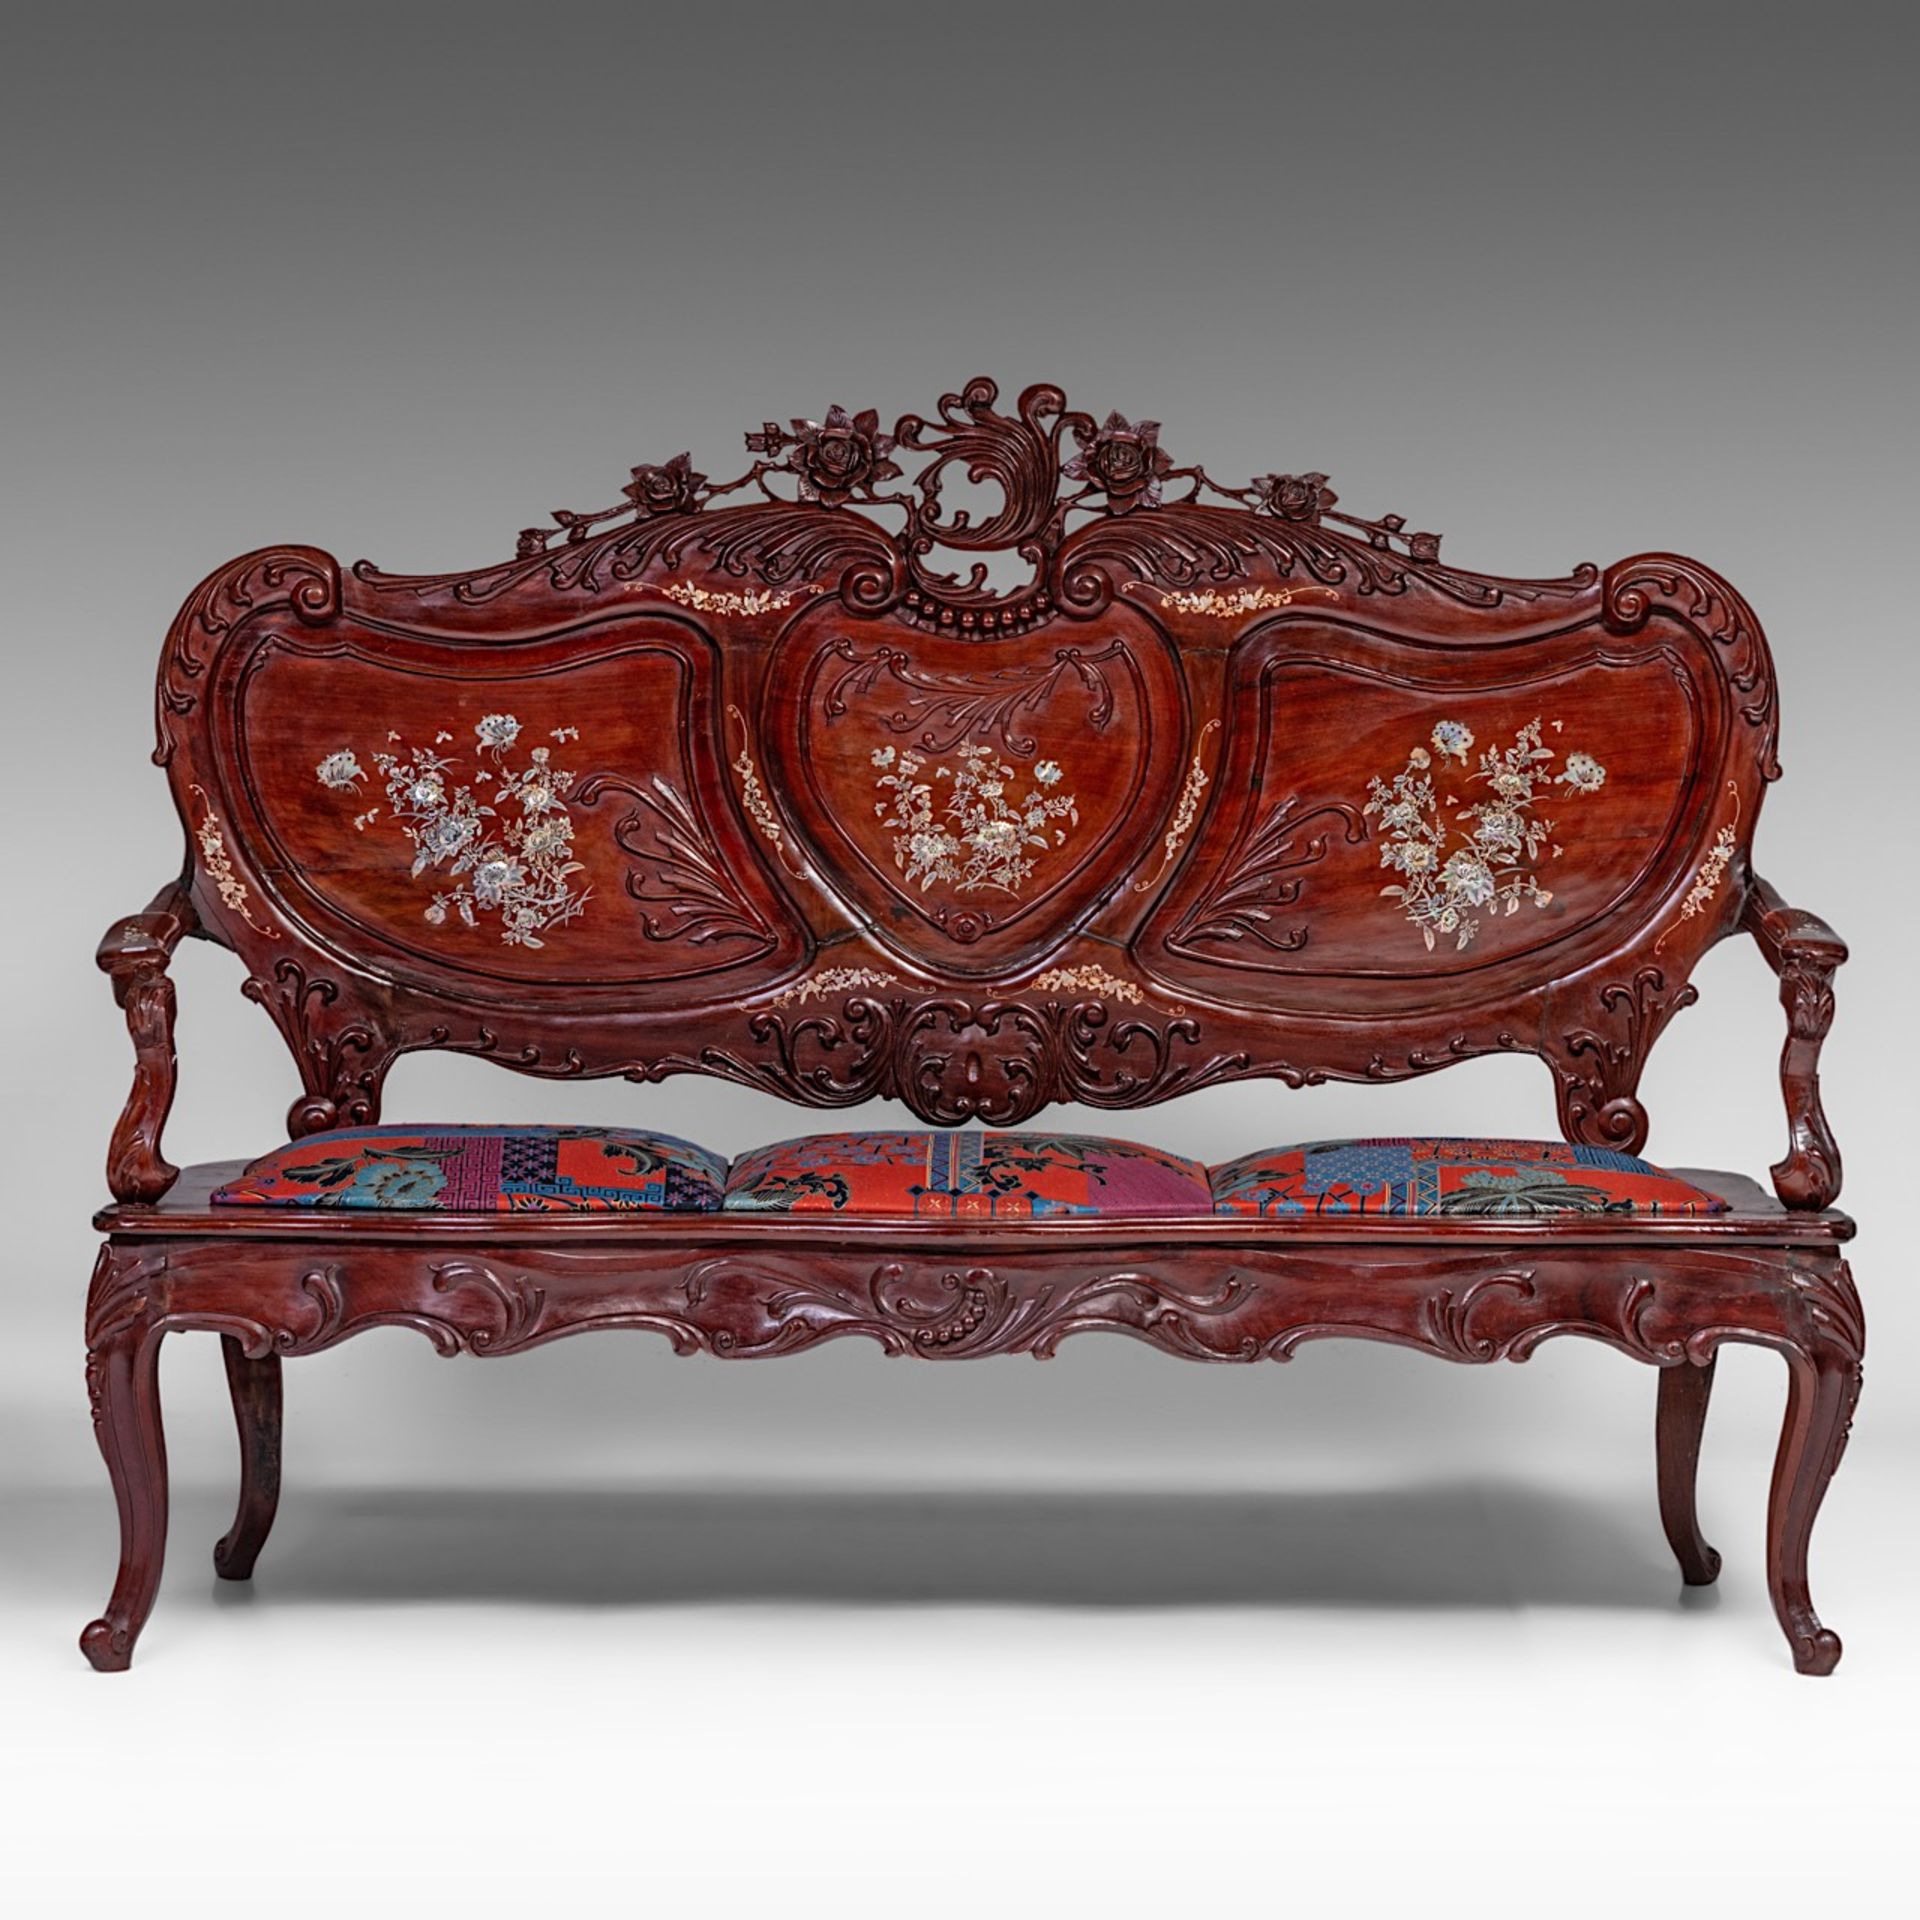 An Anglo-Chinese settee and two chairs, H settee 132 - H chair 108 cm - Image 2 of 24